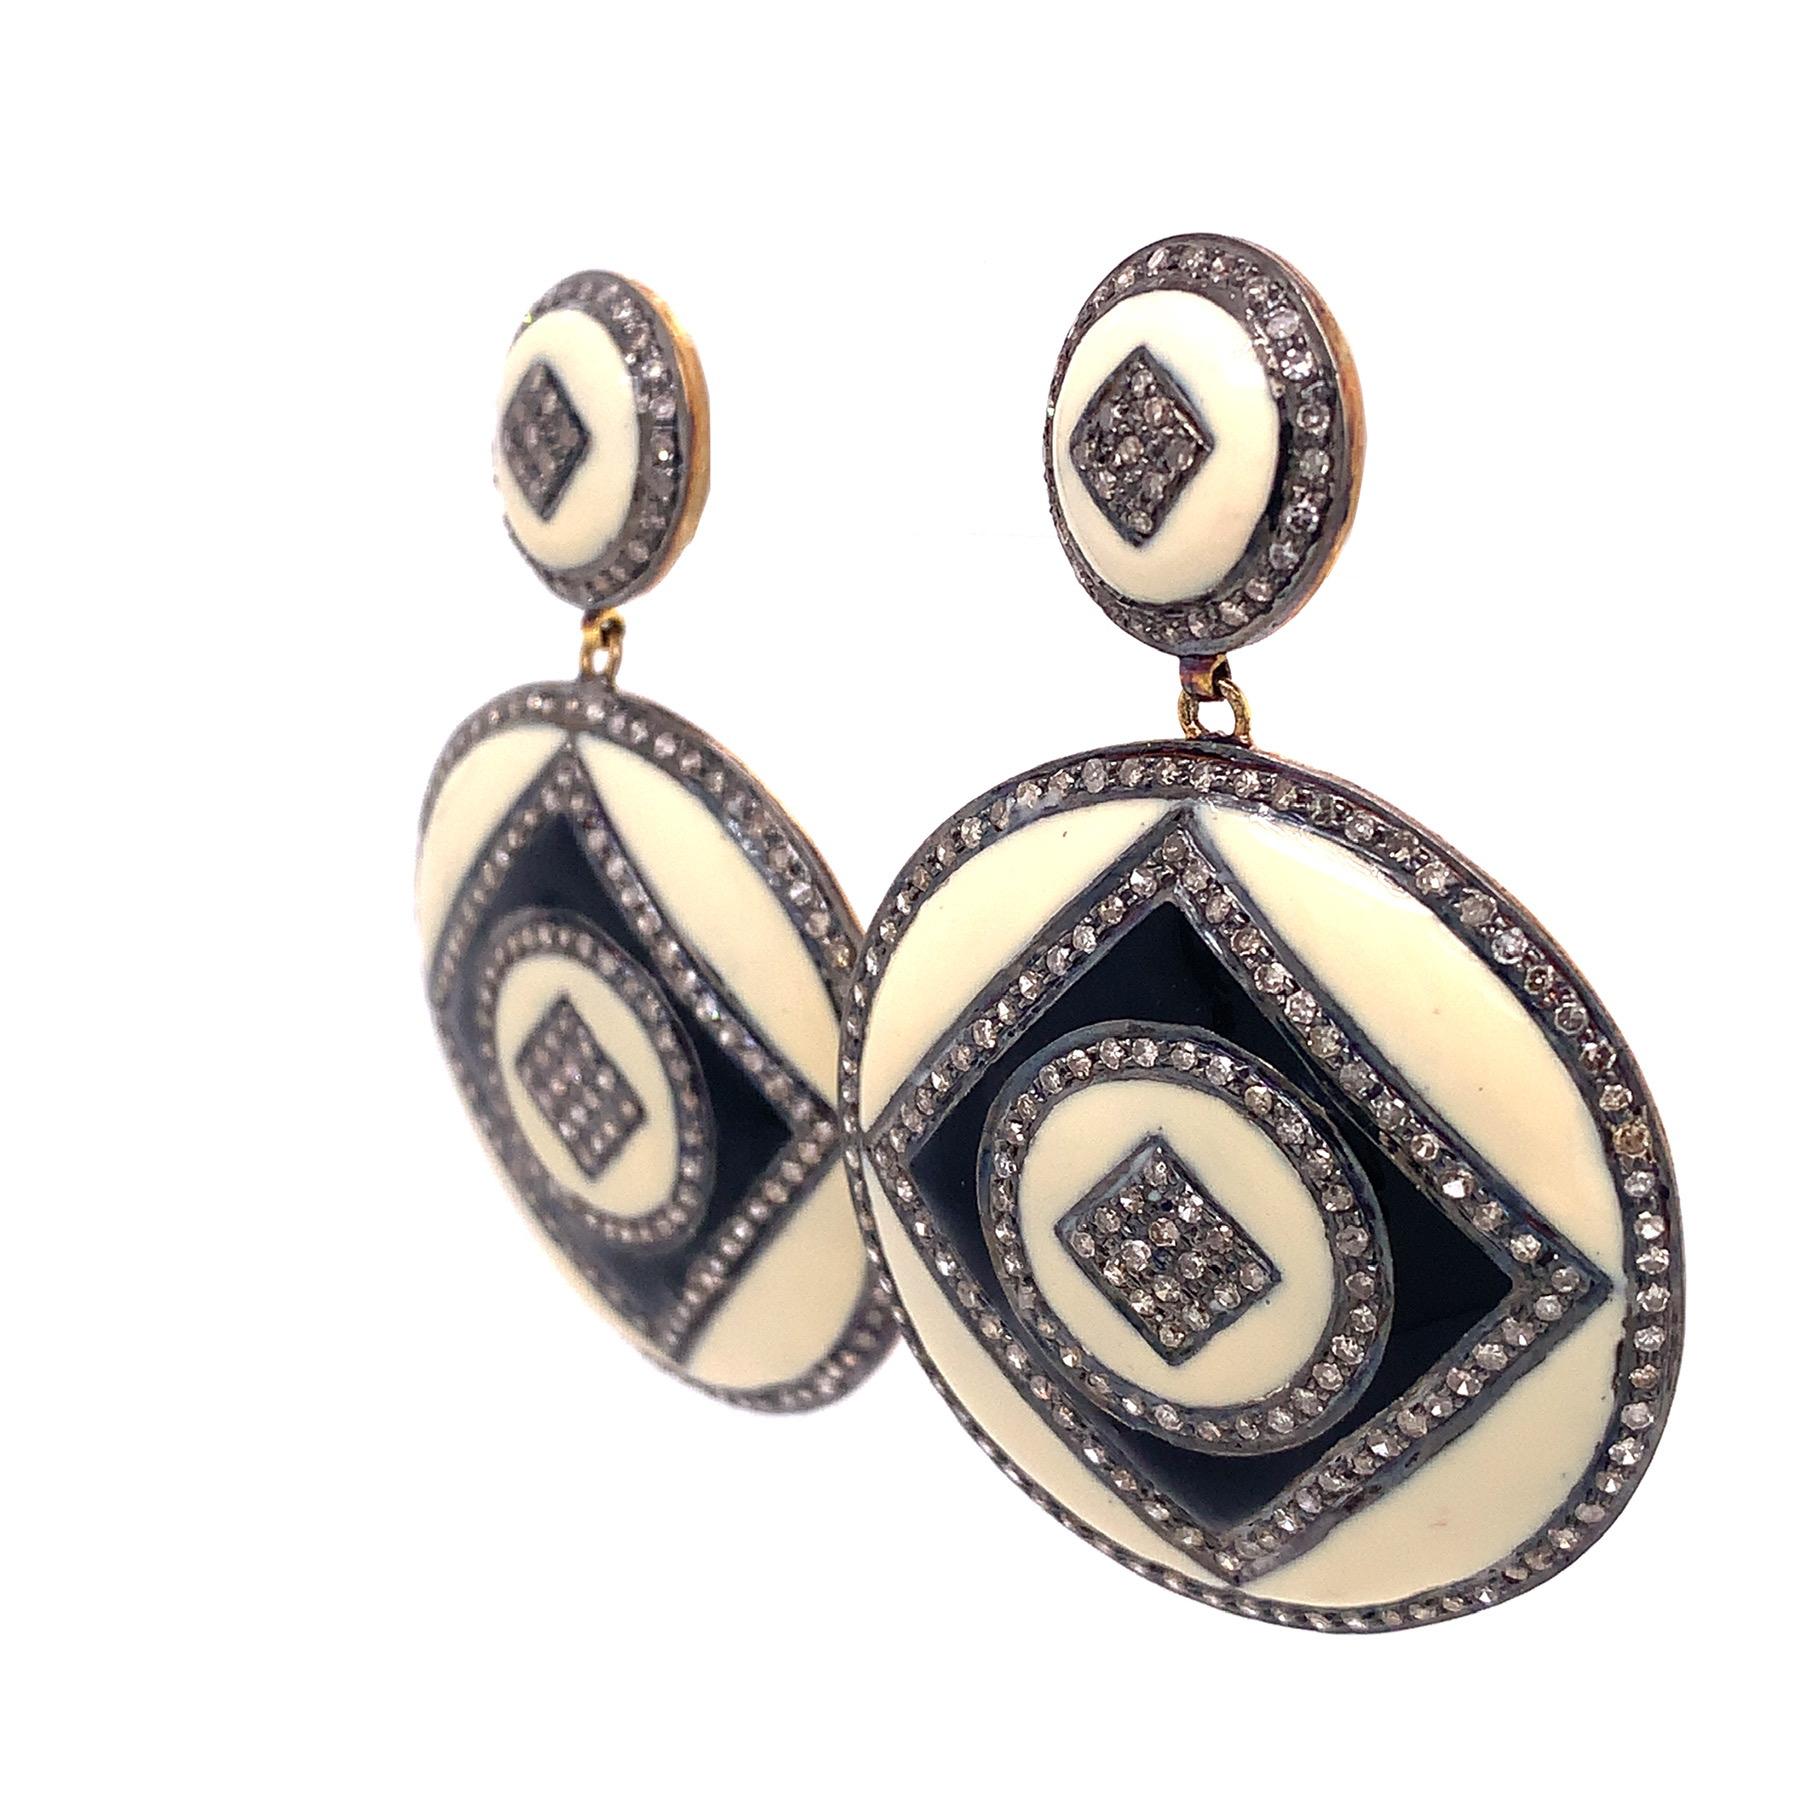 Rustic Collection

Perfect contrast in these black and ivory toned Enamel and rustic Diamond disc shaped earring with circle and square motif set in sterling silver and 14 K gold plating.

Icy Diamond: 3.06 ct total weight.